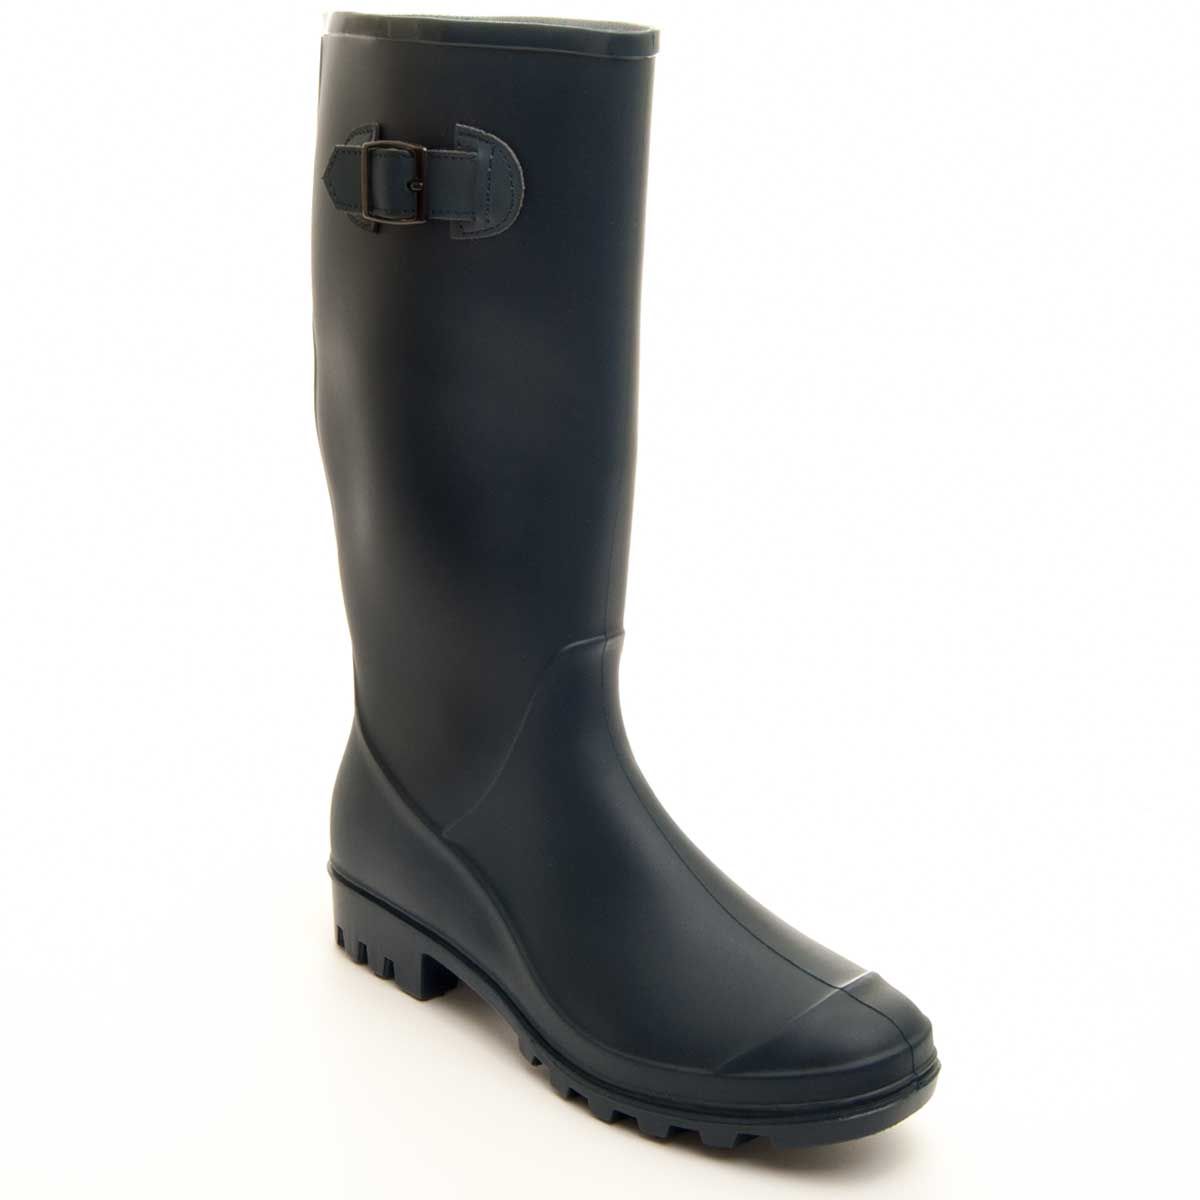 Capsula by Kelara collection. High cane boot with measures: 31cm * 15cm. Perfect for rainy days as it keeps the feet warm and dry. Detail of external side buckle. Both sole and outer lining are one piece so that water does not penetrate. Anti-slip rubber floor. Previous and later reinforcement for durability. Removable padded template.